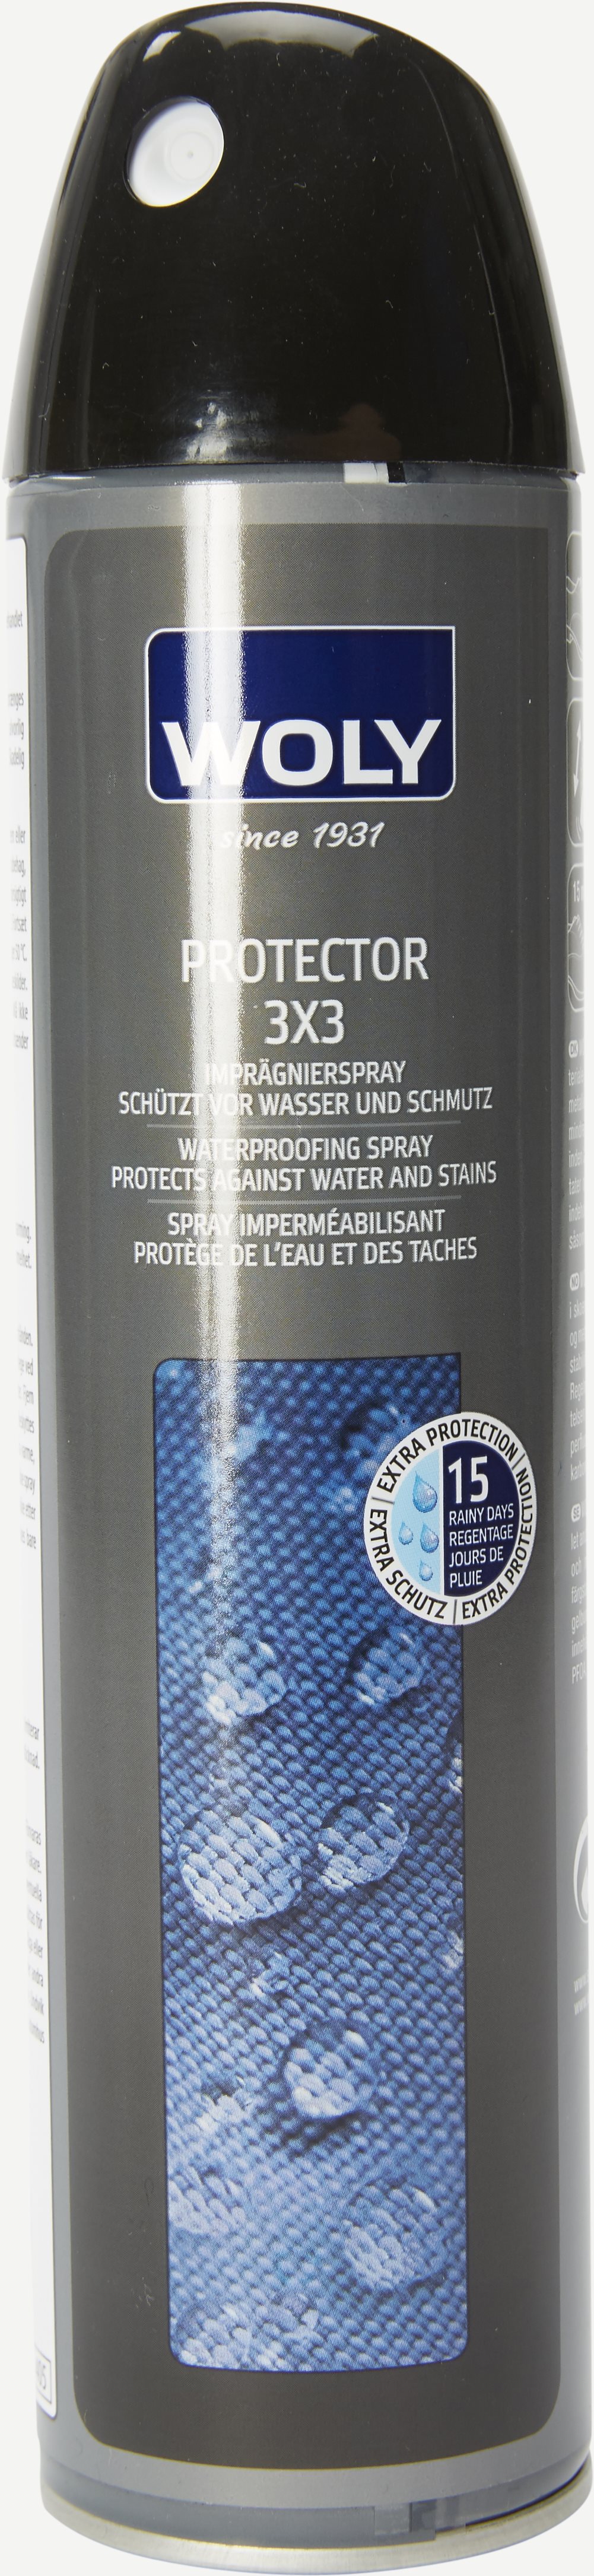 Woly Protector Accessoarer WOLY PROTECTOR 3X3 Grå